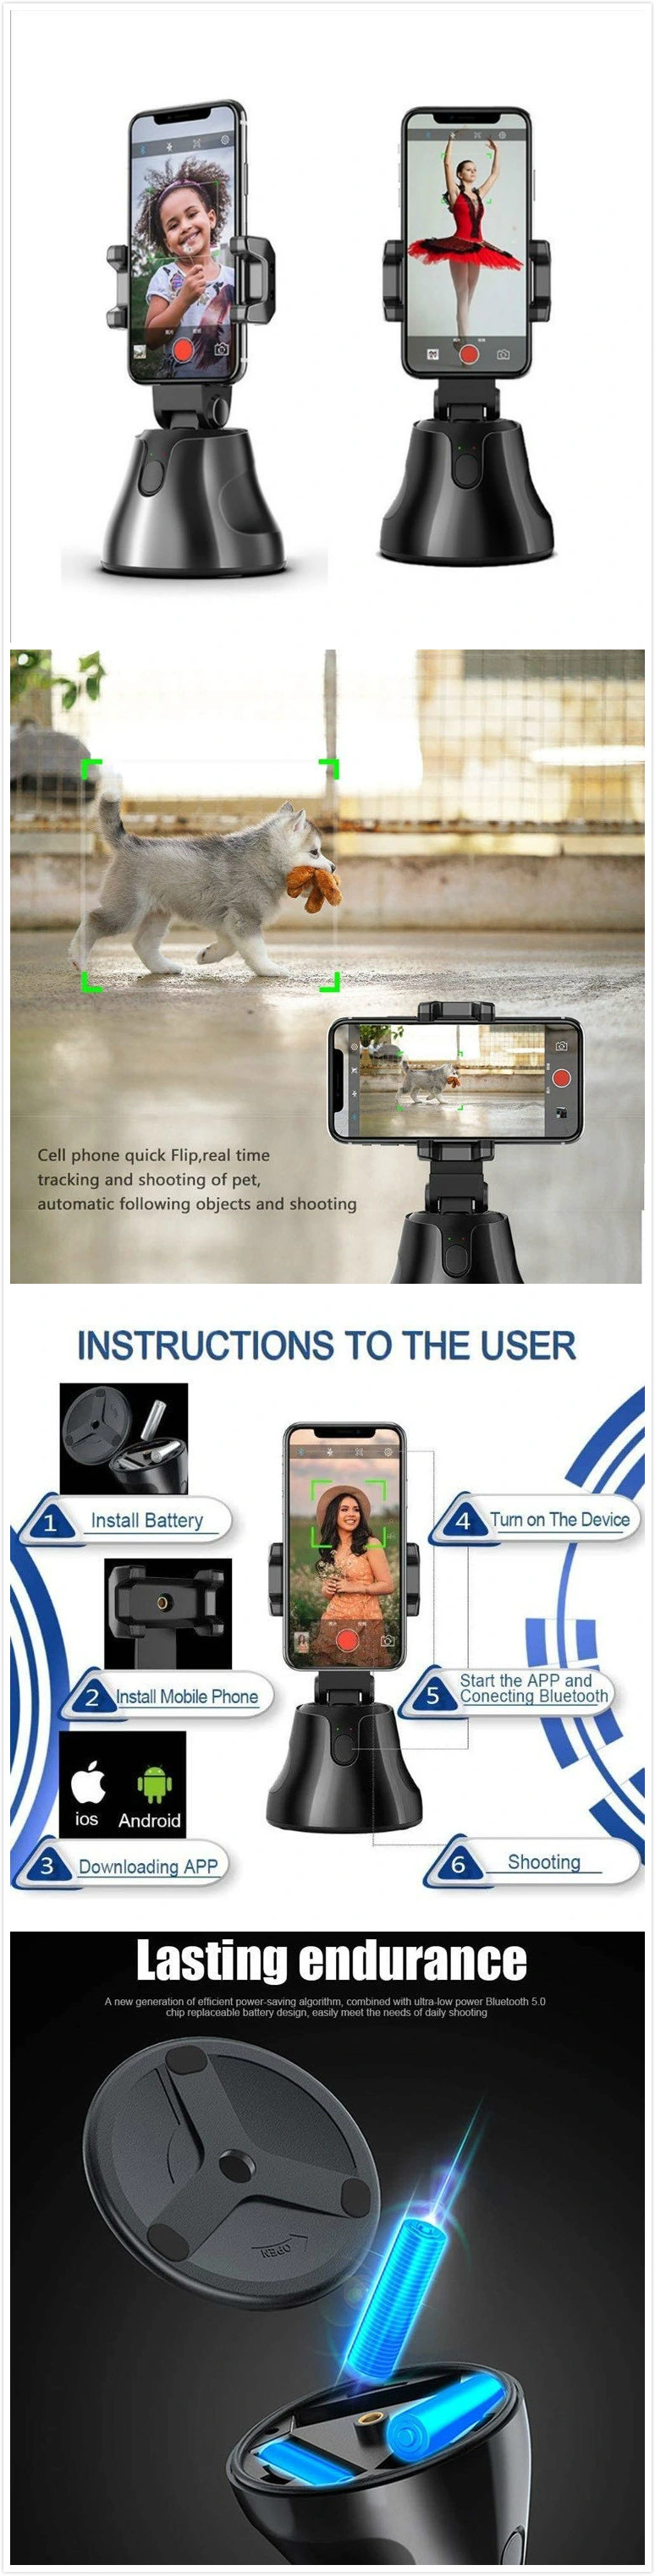 Apai Genie 360 Degree Rotation Auto Selfie Face Smart Object Tracking Cell Phone Holder